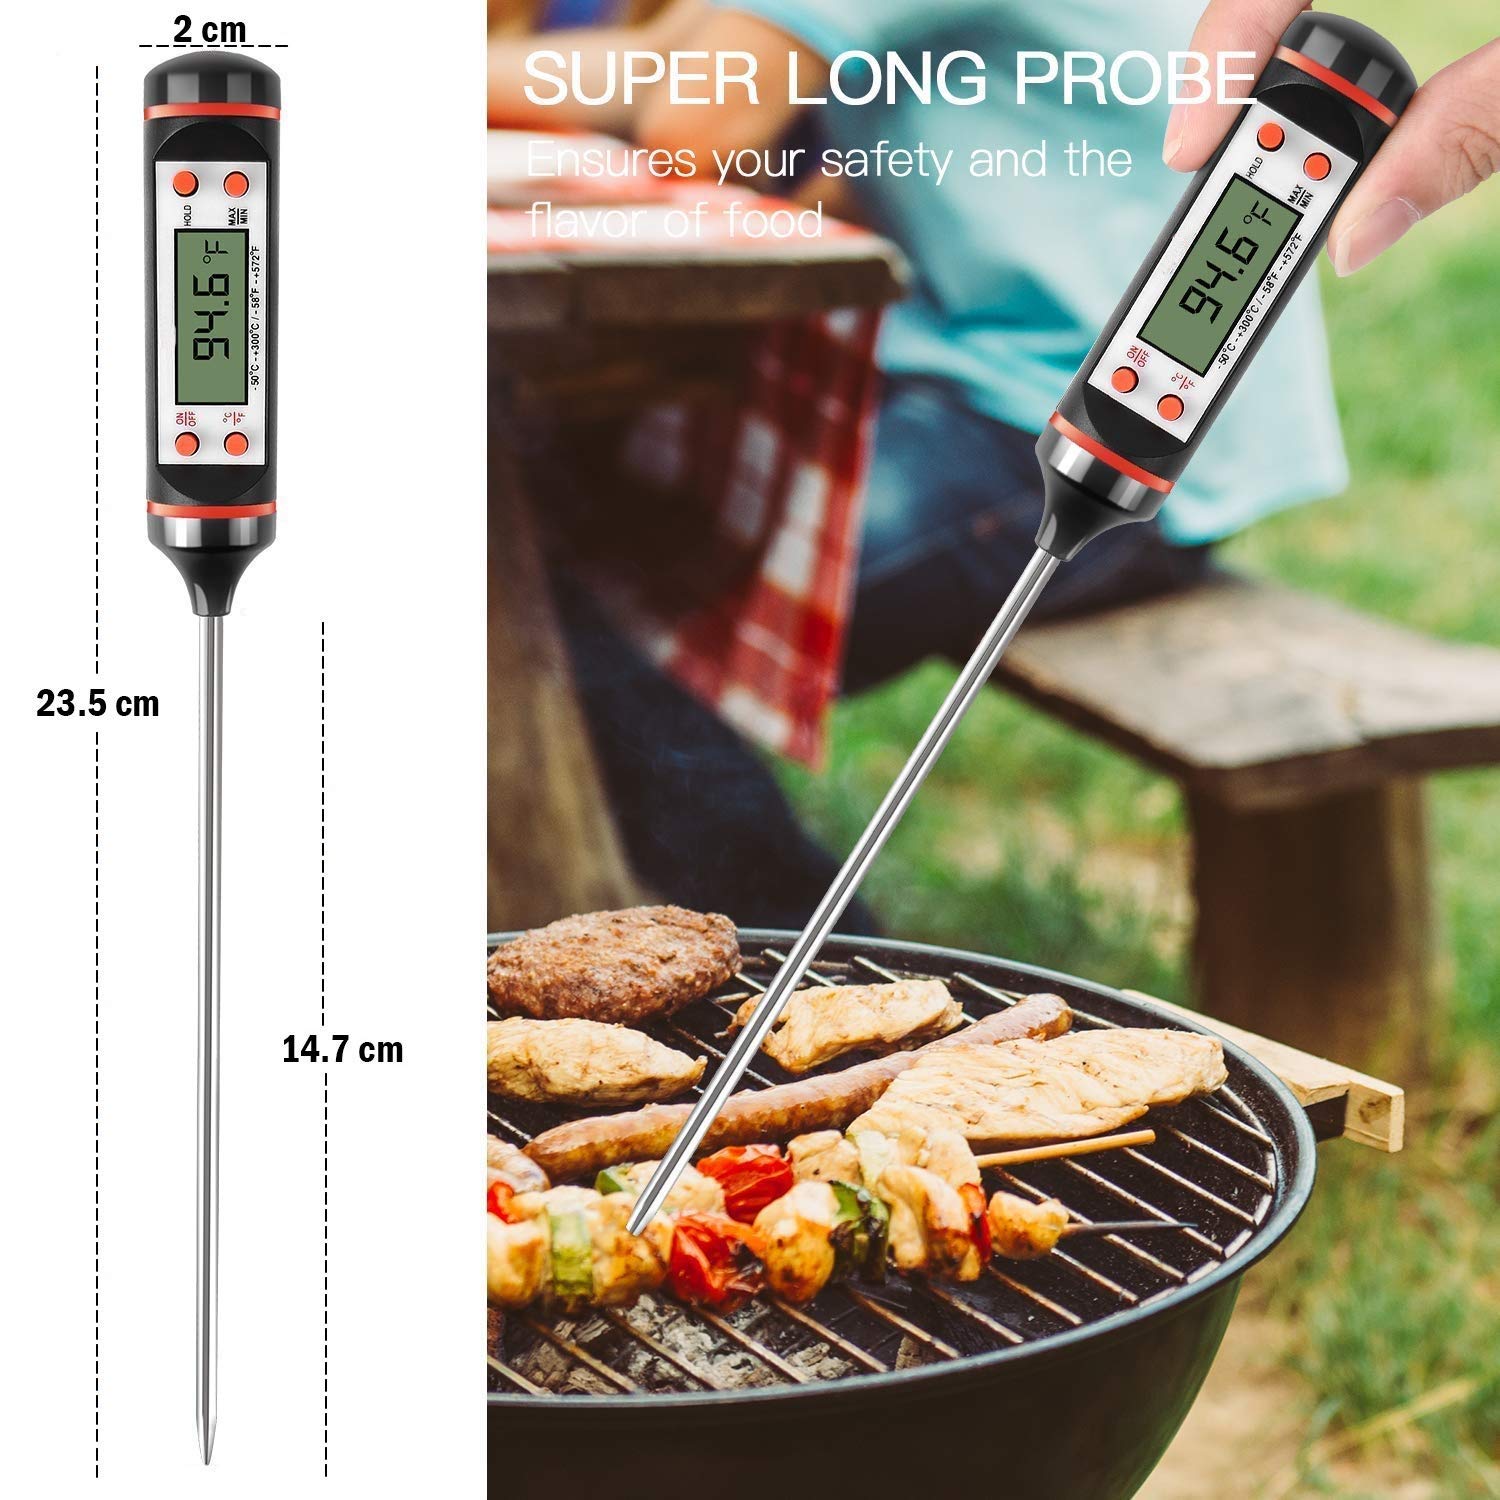 Digital Multi-Functional with Instant Read Cooking Thermometer With auto turnoff function Best Digital Thermometer for All Food, Grill, BBQ and Candy